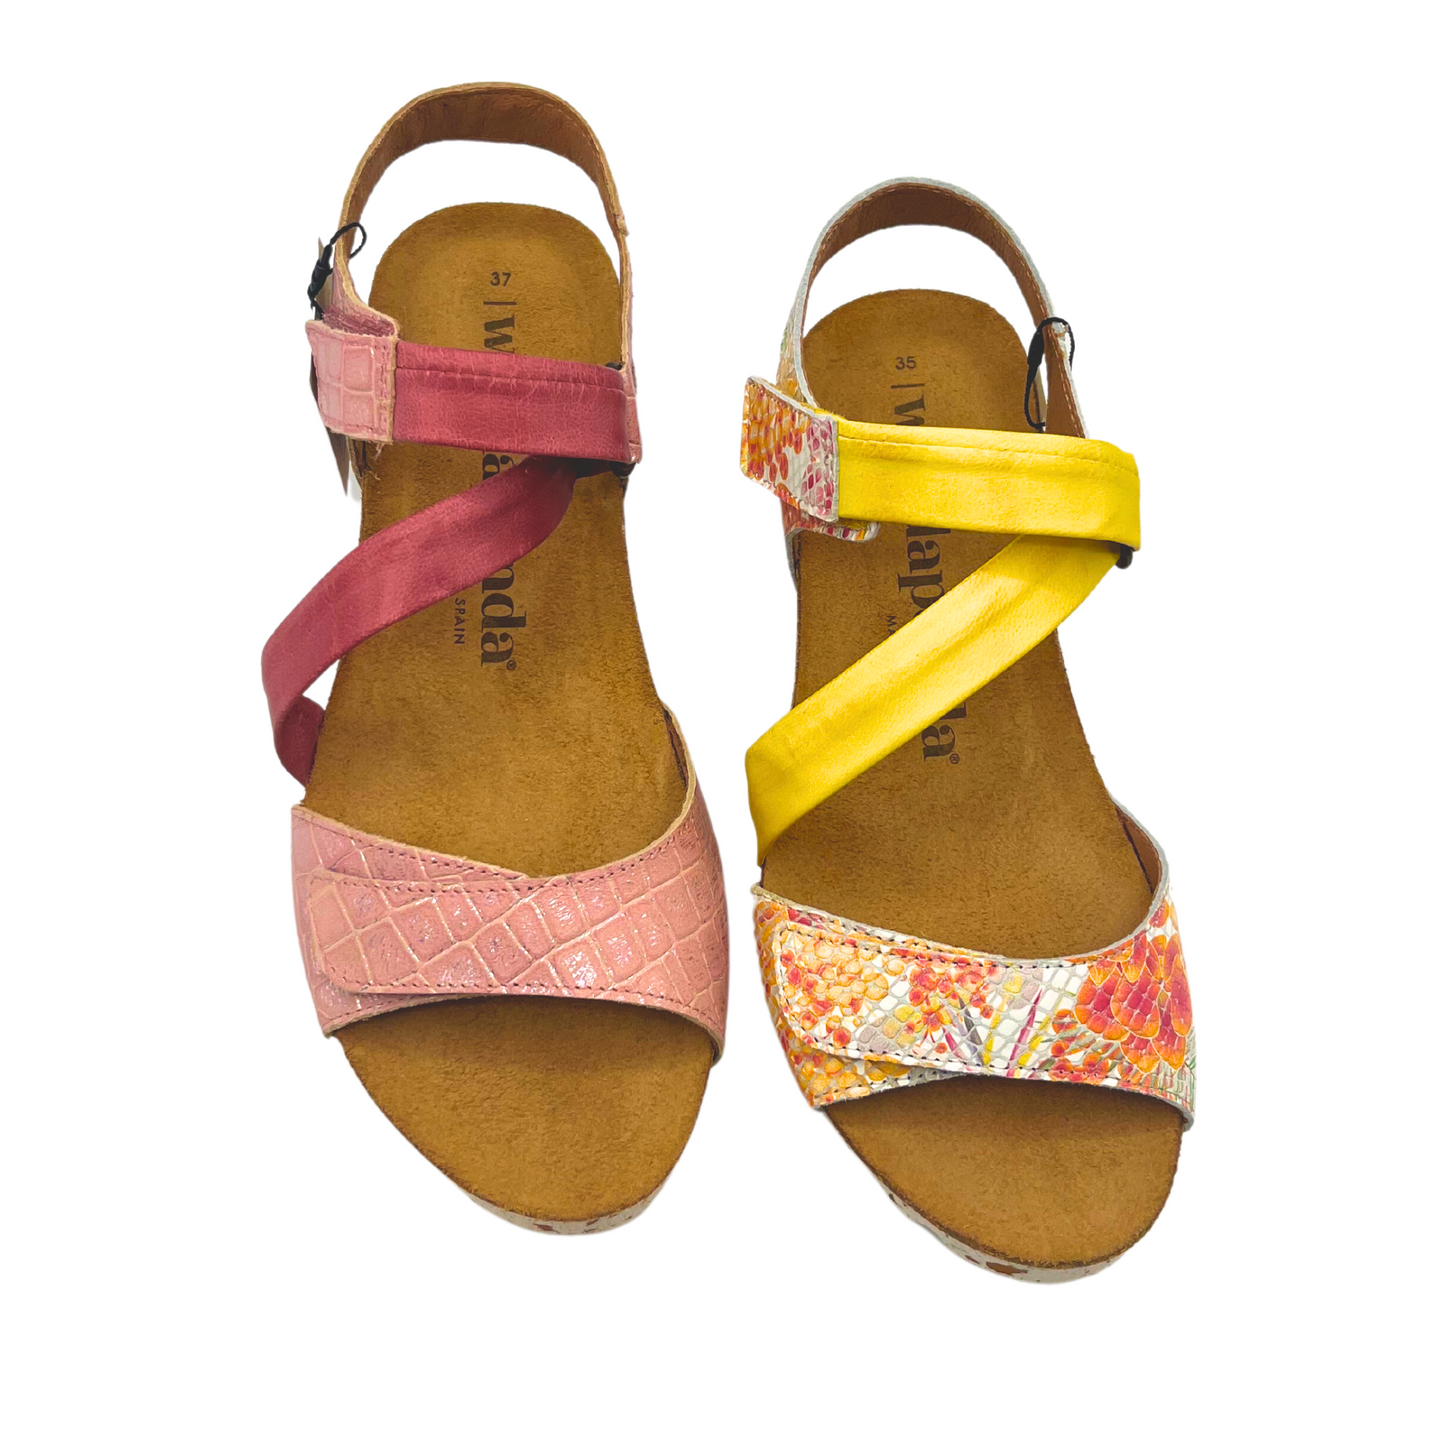 Top down view of a sandal shown in both pink and yellow colorway